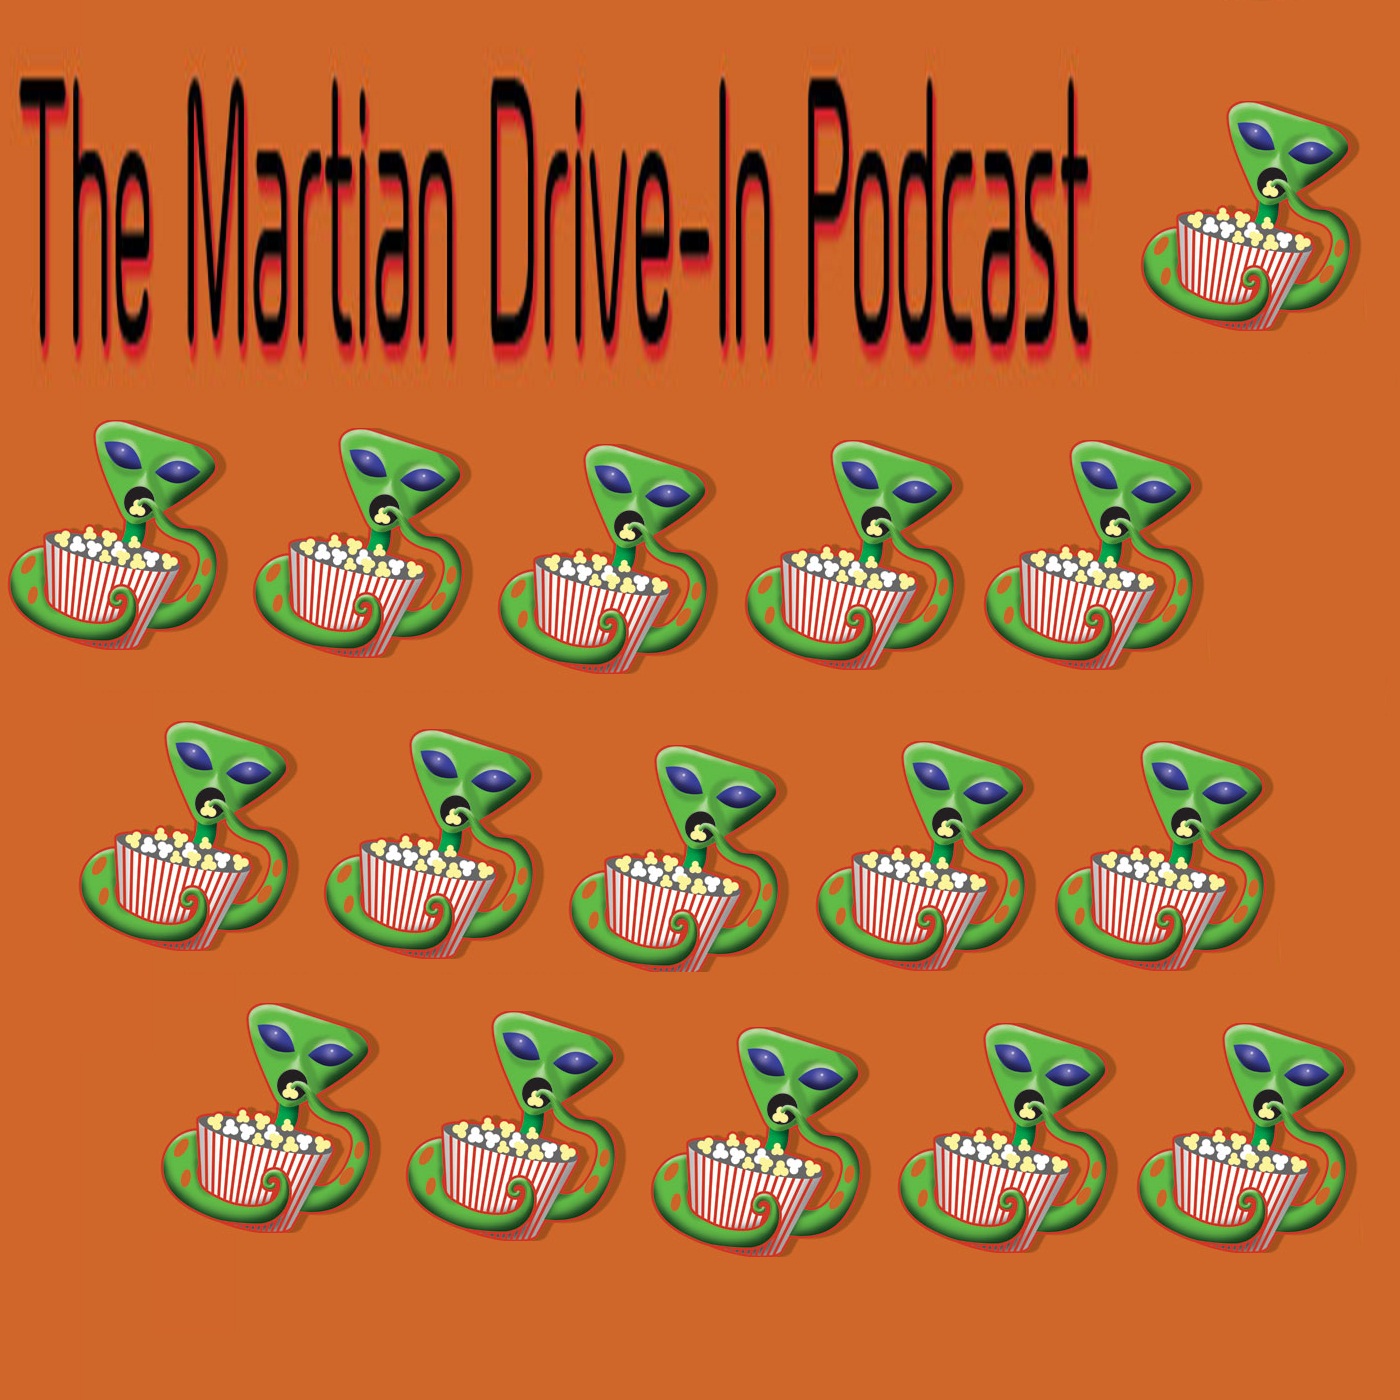 The Martian Drive In Podcast #12 - The Mystery Men Specials